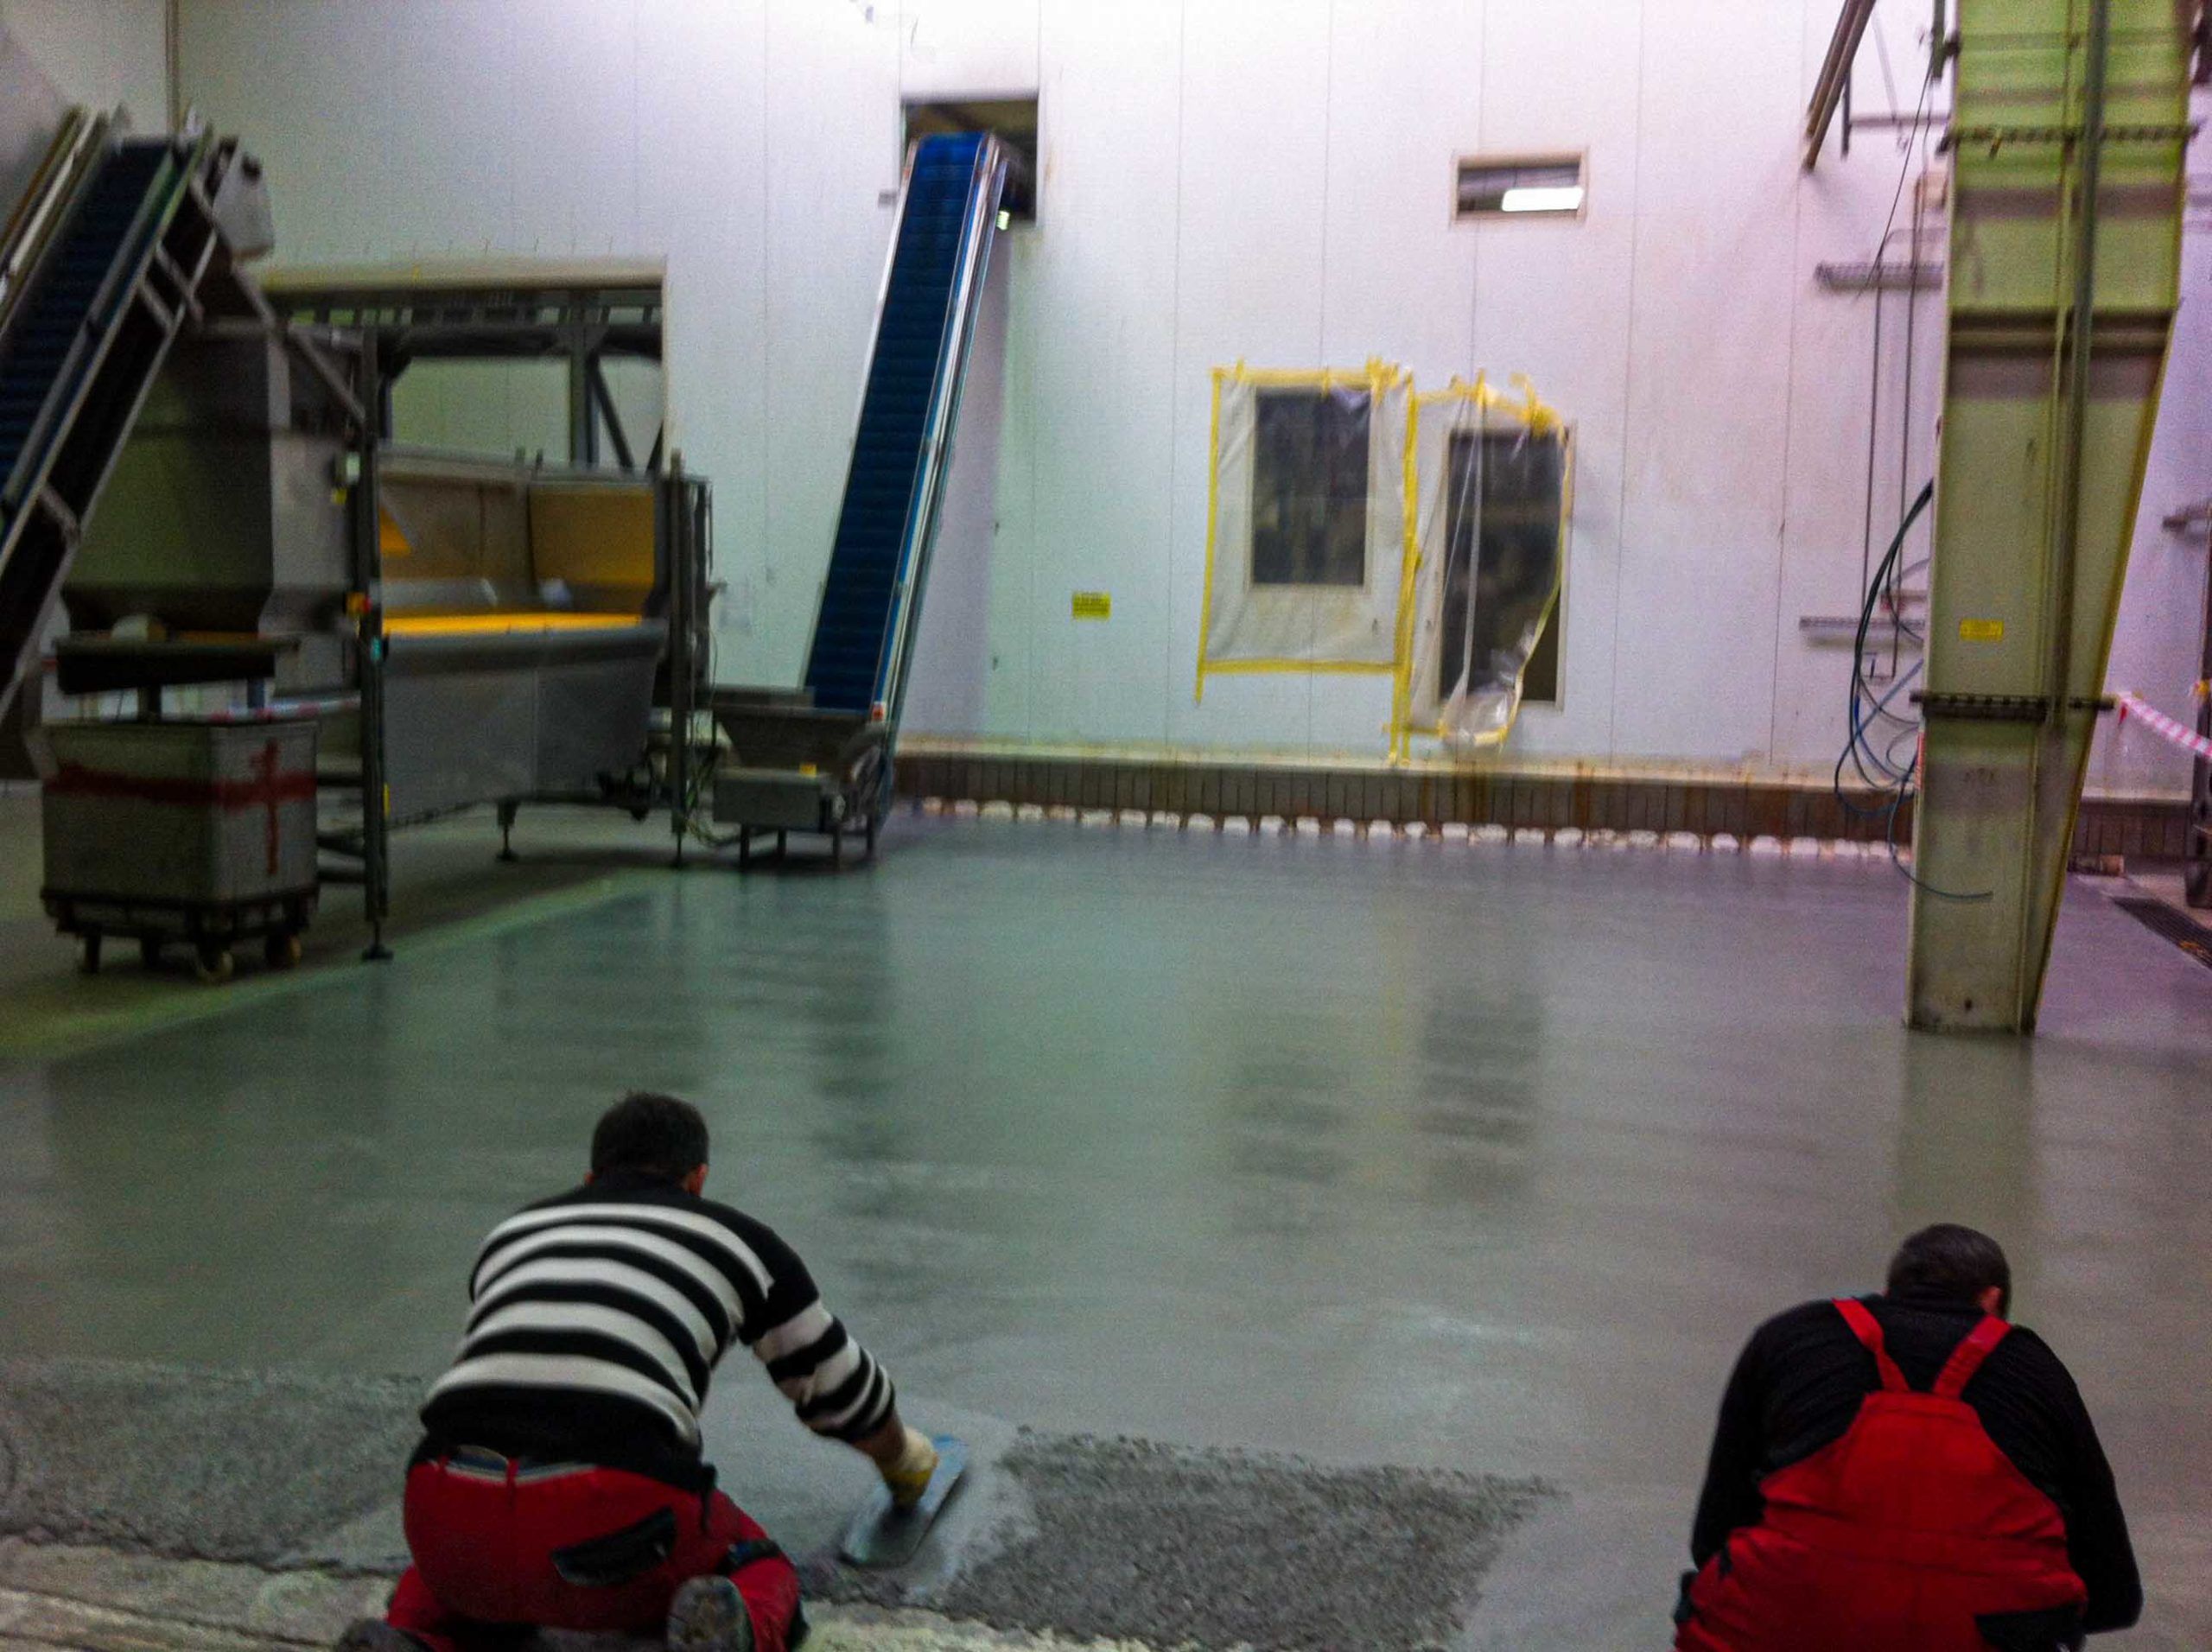 Intersnack - Epoxy flooring for Food and Beverage Production Facilities